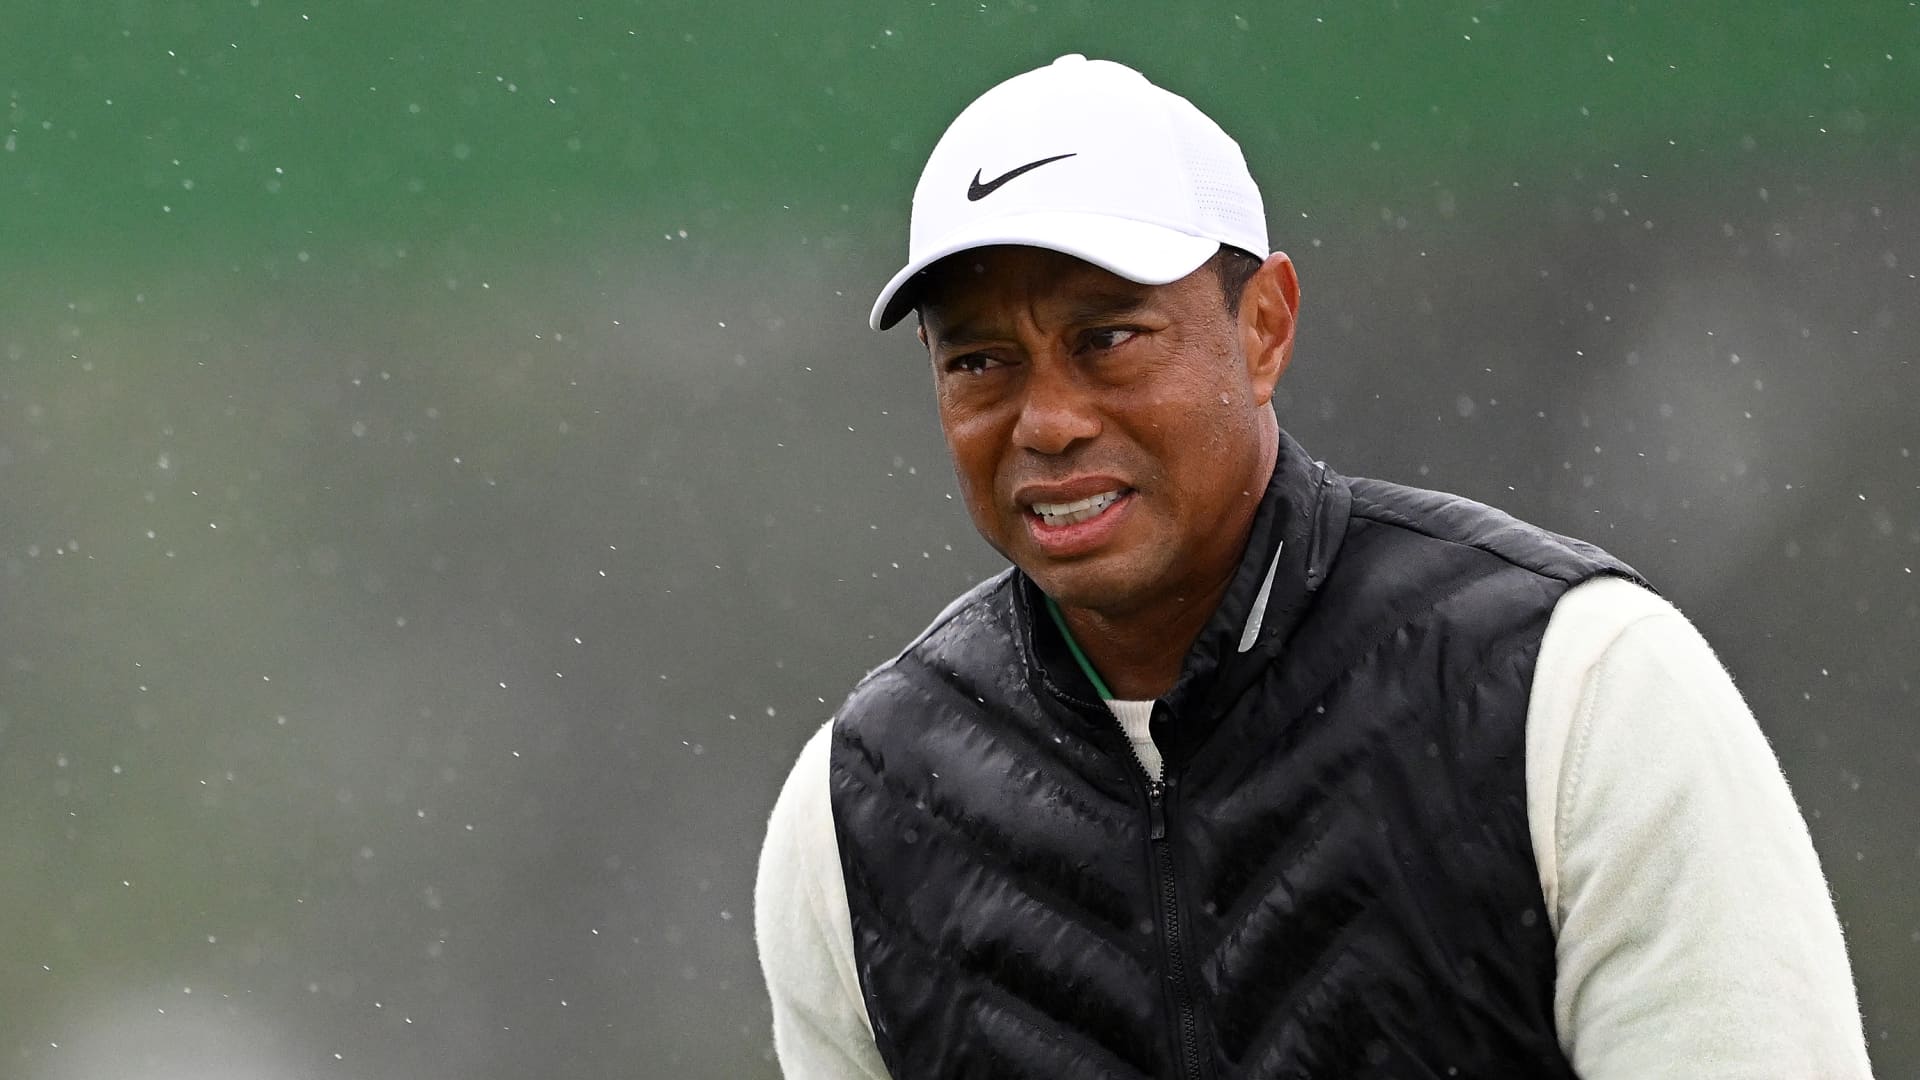 Tiger Woods new golf league faces dome collapse